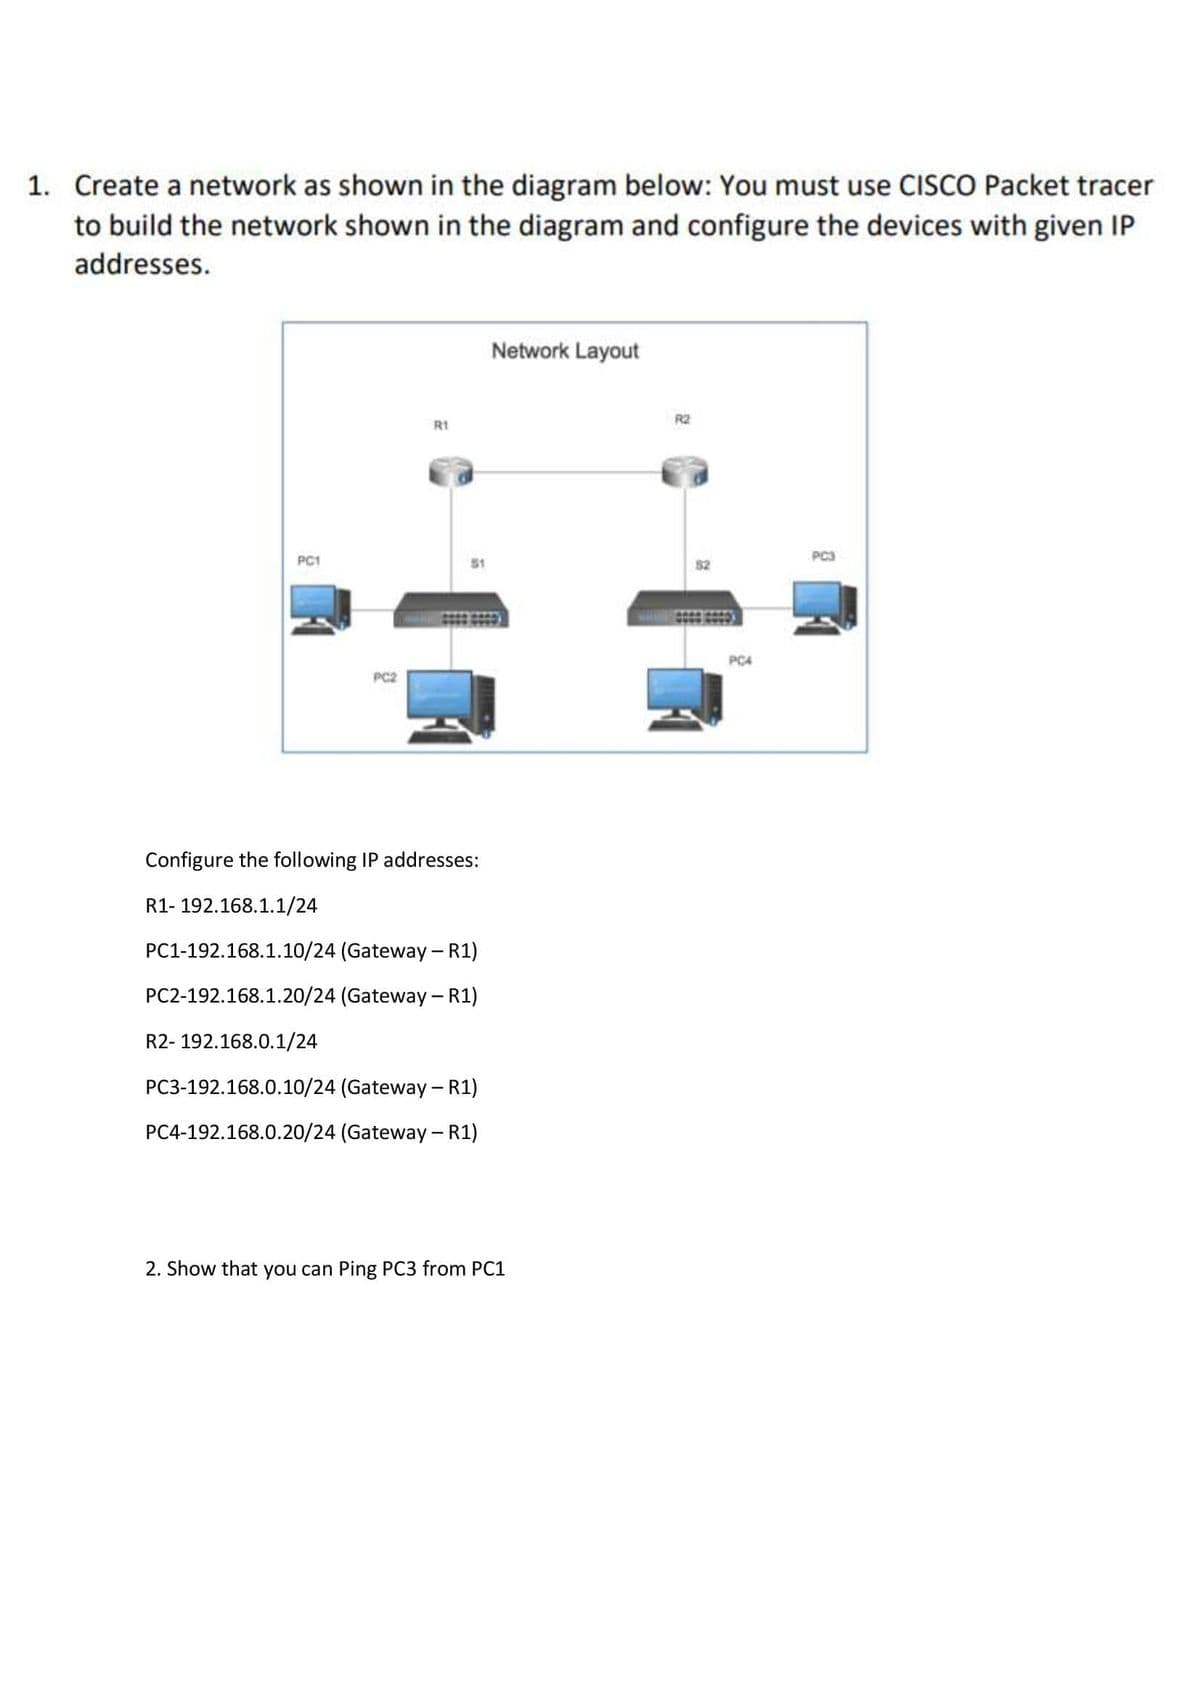 1. Create a network as shown in the diagram below: You must use CISCO Packet tracer
to build the network shown in the diagram and configure the devices with given IP
addresses.
Network Layout
R2
R1
PC1
PC3
PC4
PC2
Configure the following IP addresses:
R1- 192.168.1.1/24
PC1-192.168.1.10/24 (Gateway – R1)
PC2-192.168.1.20/24 (Gateway - R1)
R2- 192.168.0.1/24
PC3-192.168.0.10/24 (Gateway – R1)
PC4-192.168.0.20/24 (Gateway - R1)
2. Show that you can Ping PC3 from PC1
